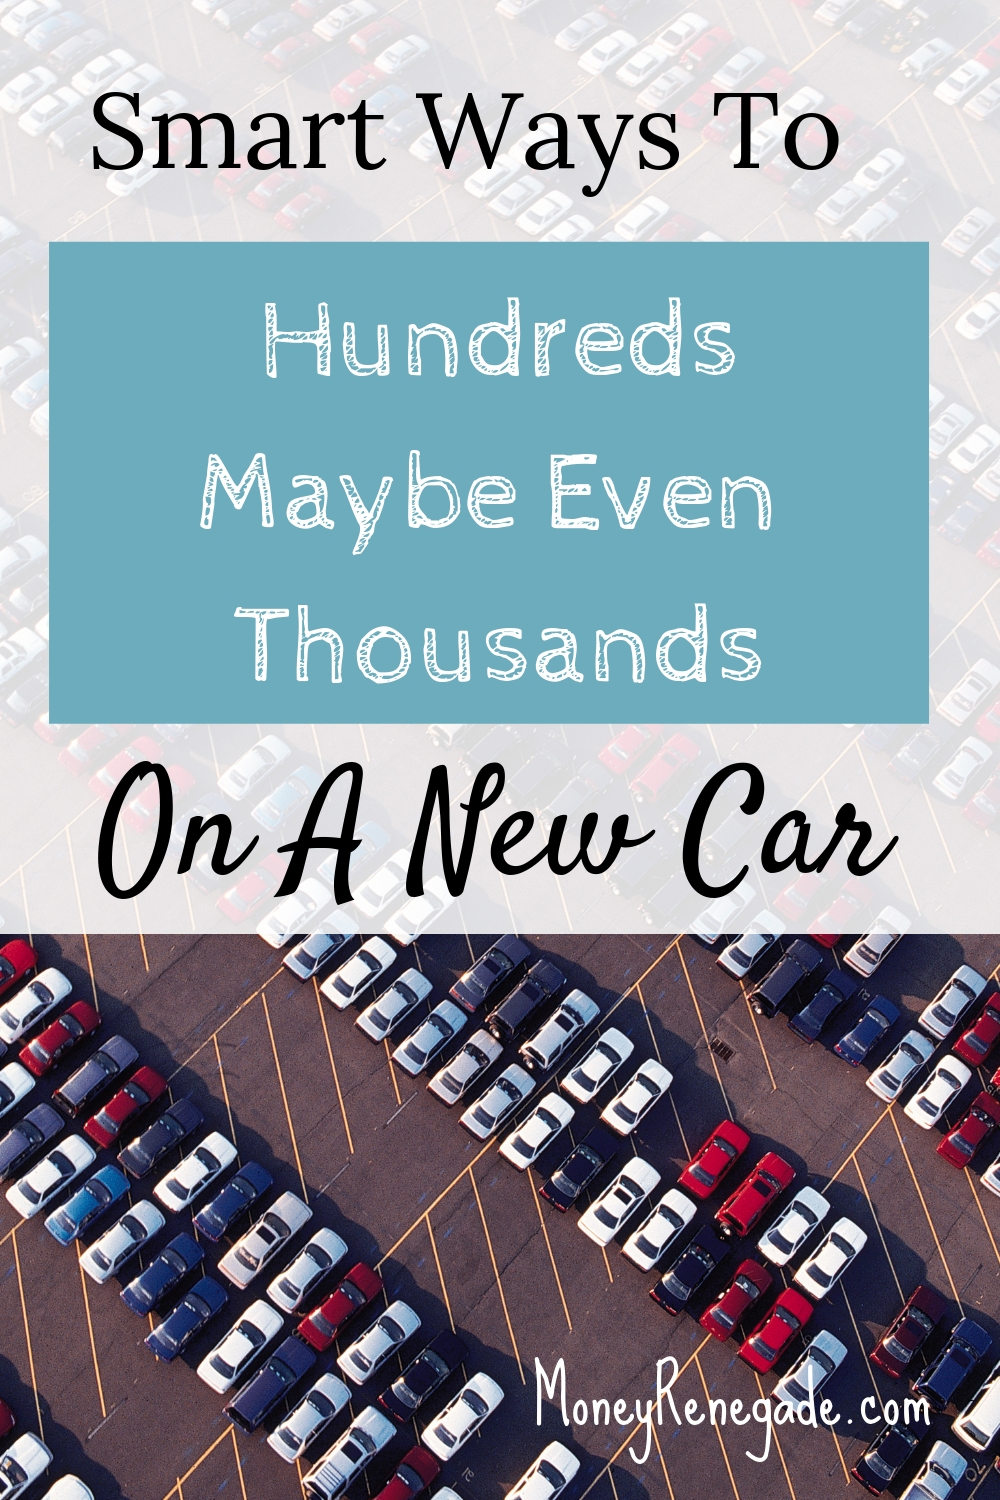 Save Hundreds maybe even thousands on a new car